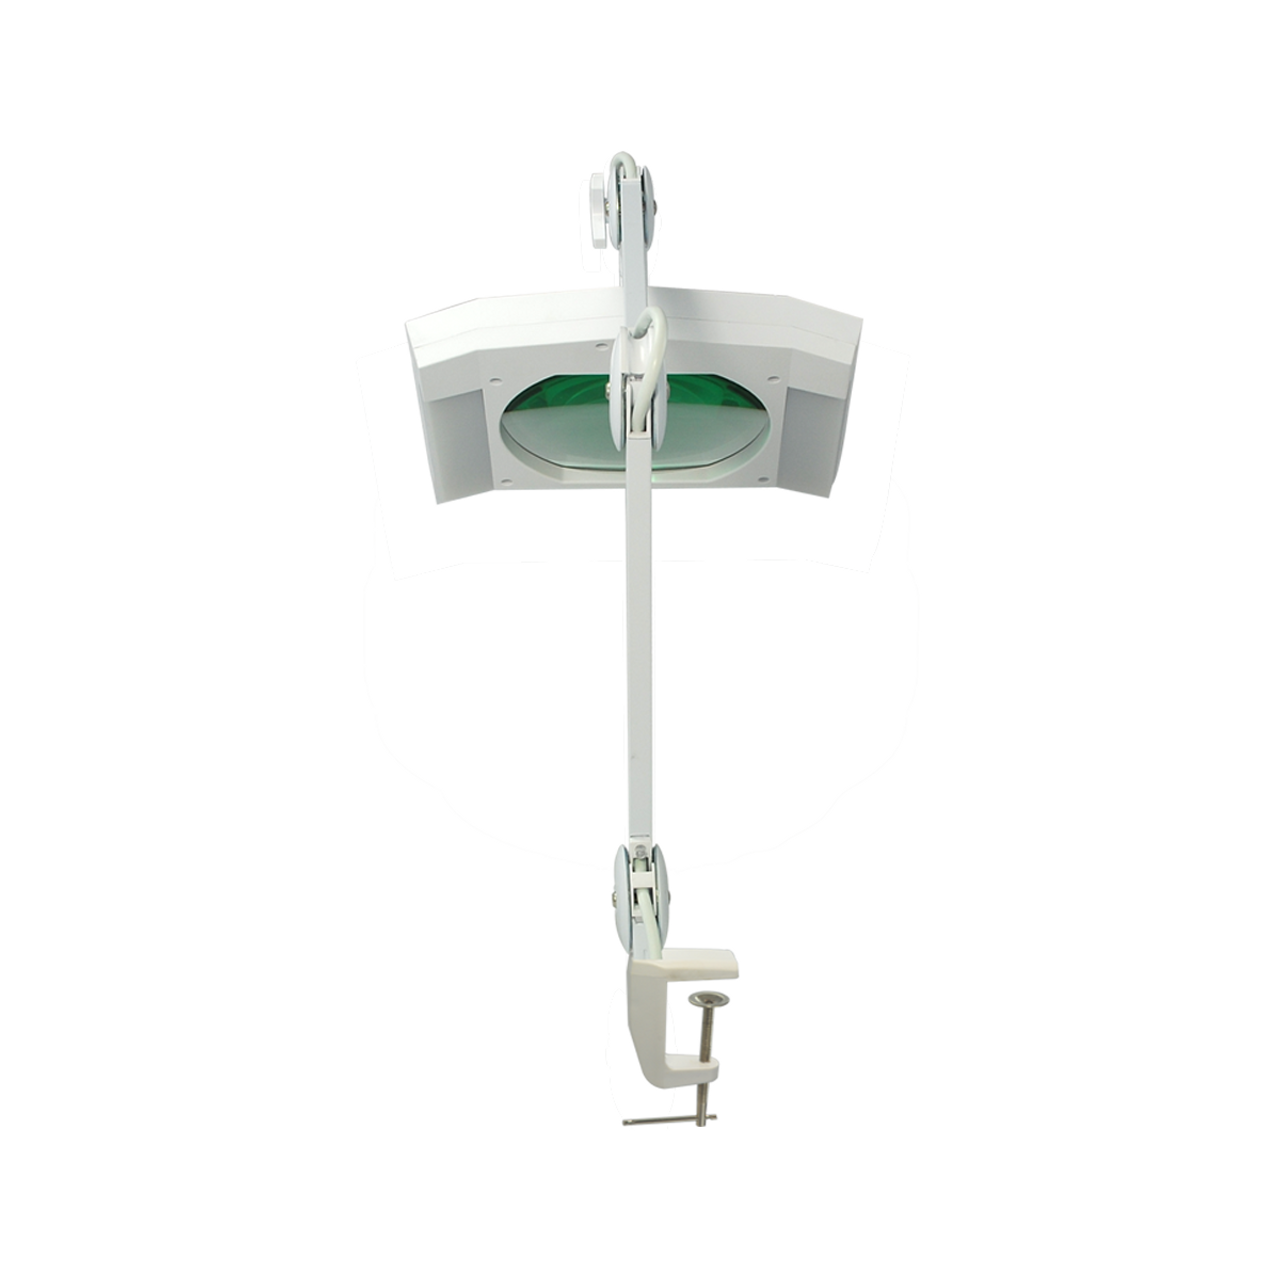 SMD LED Magnifying Lamp with Clamp 3 Diopter, Square Head